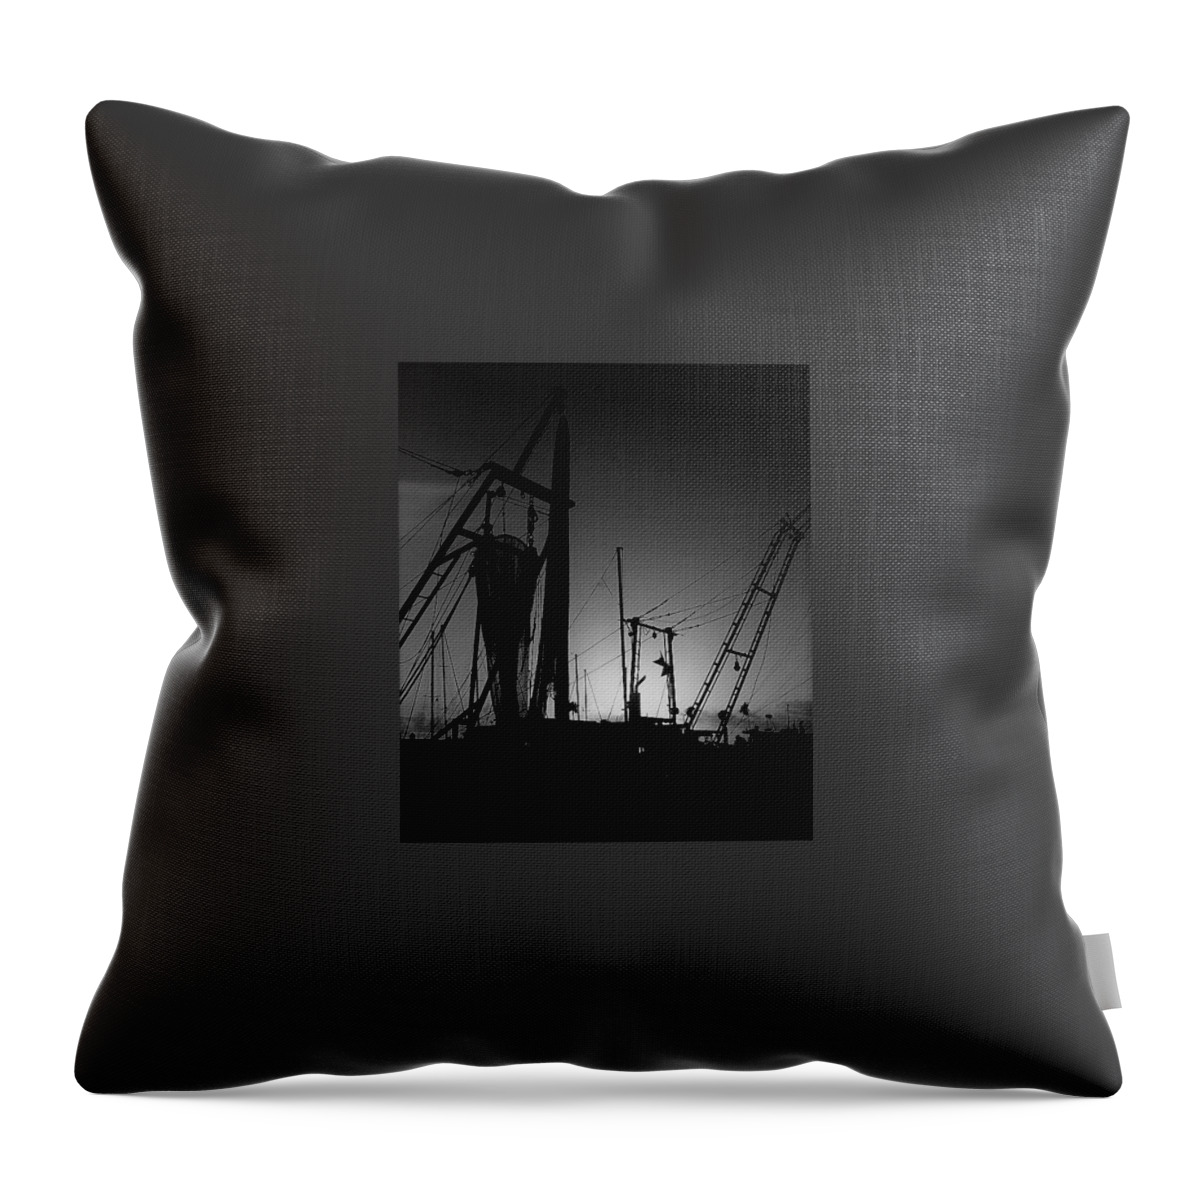 Sprimp Throw Pillow featuring the photograph To The Sea We Go by John Glass